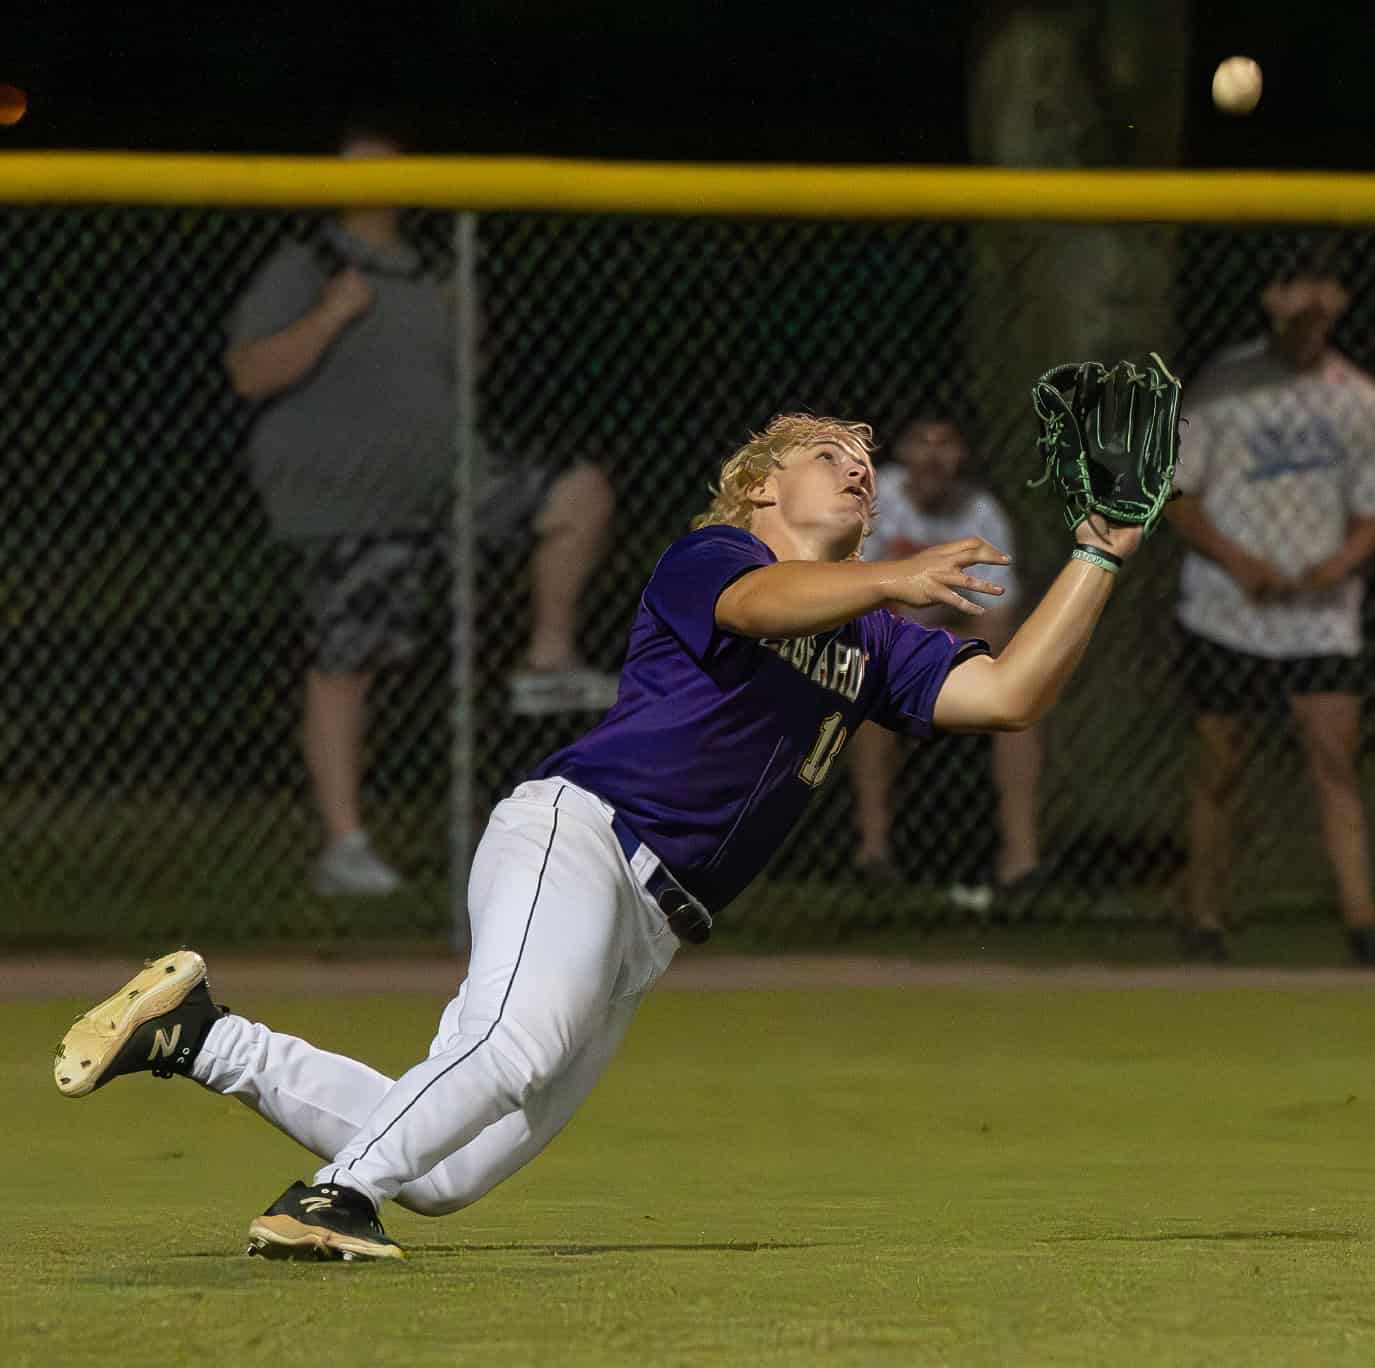 Hernando High’s, 13, Bryce Saltsman was able to make a catch helping to keep the Nature Coast from sustaining a rally in the late innings of the FHSAA 4A Regional semifinal game at Nature Coast. Photo by [Joseph Dicristofalo]